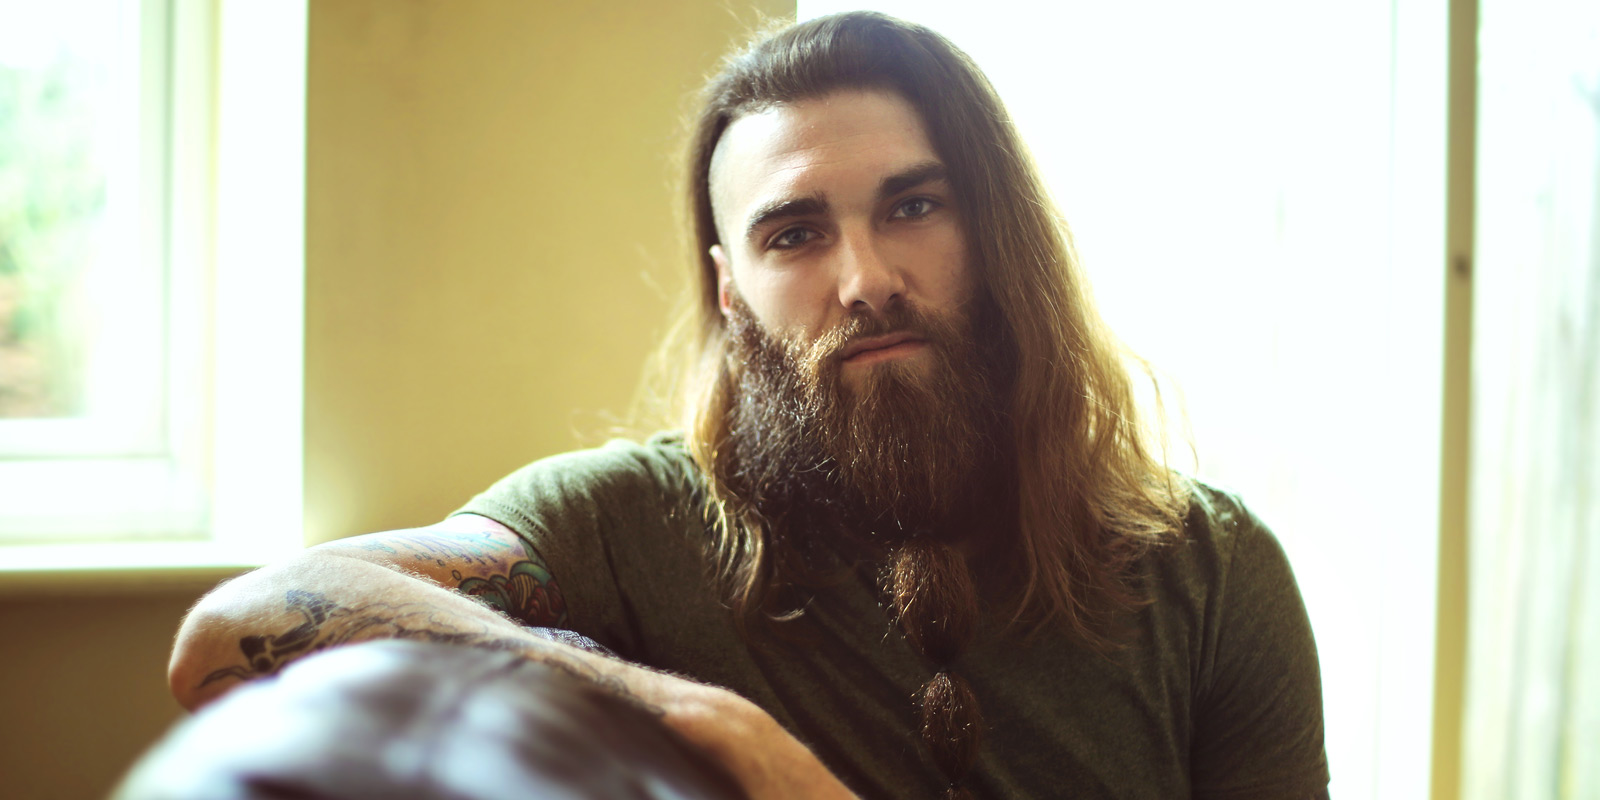 Long Hair Men Beards - Pictures, Advice, Inspiration, How To, and More